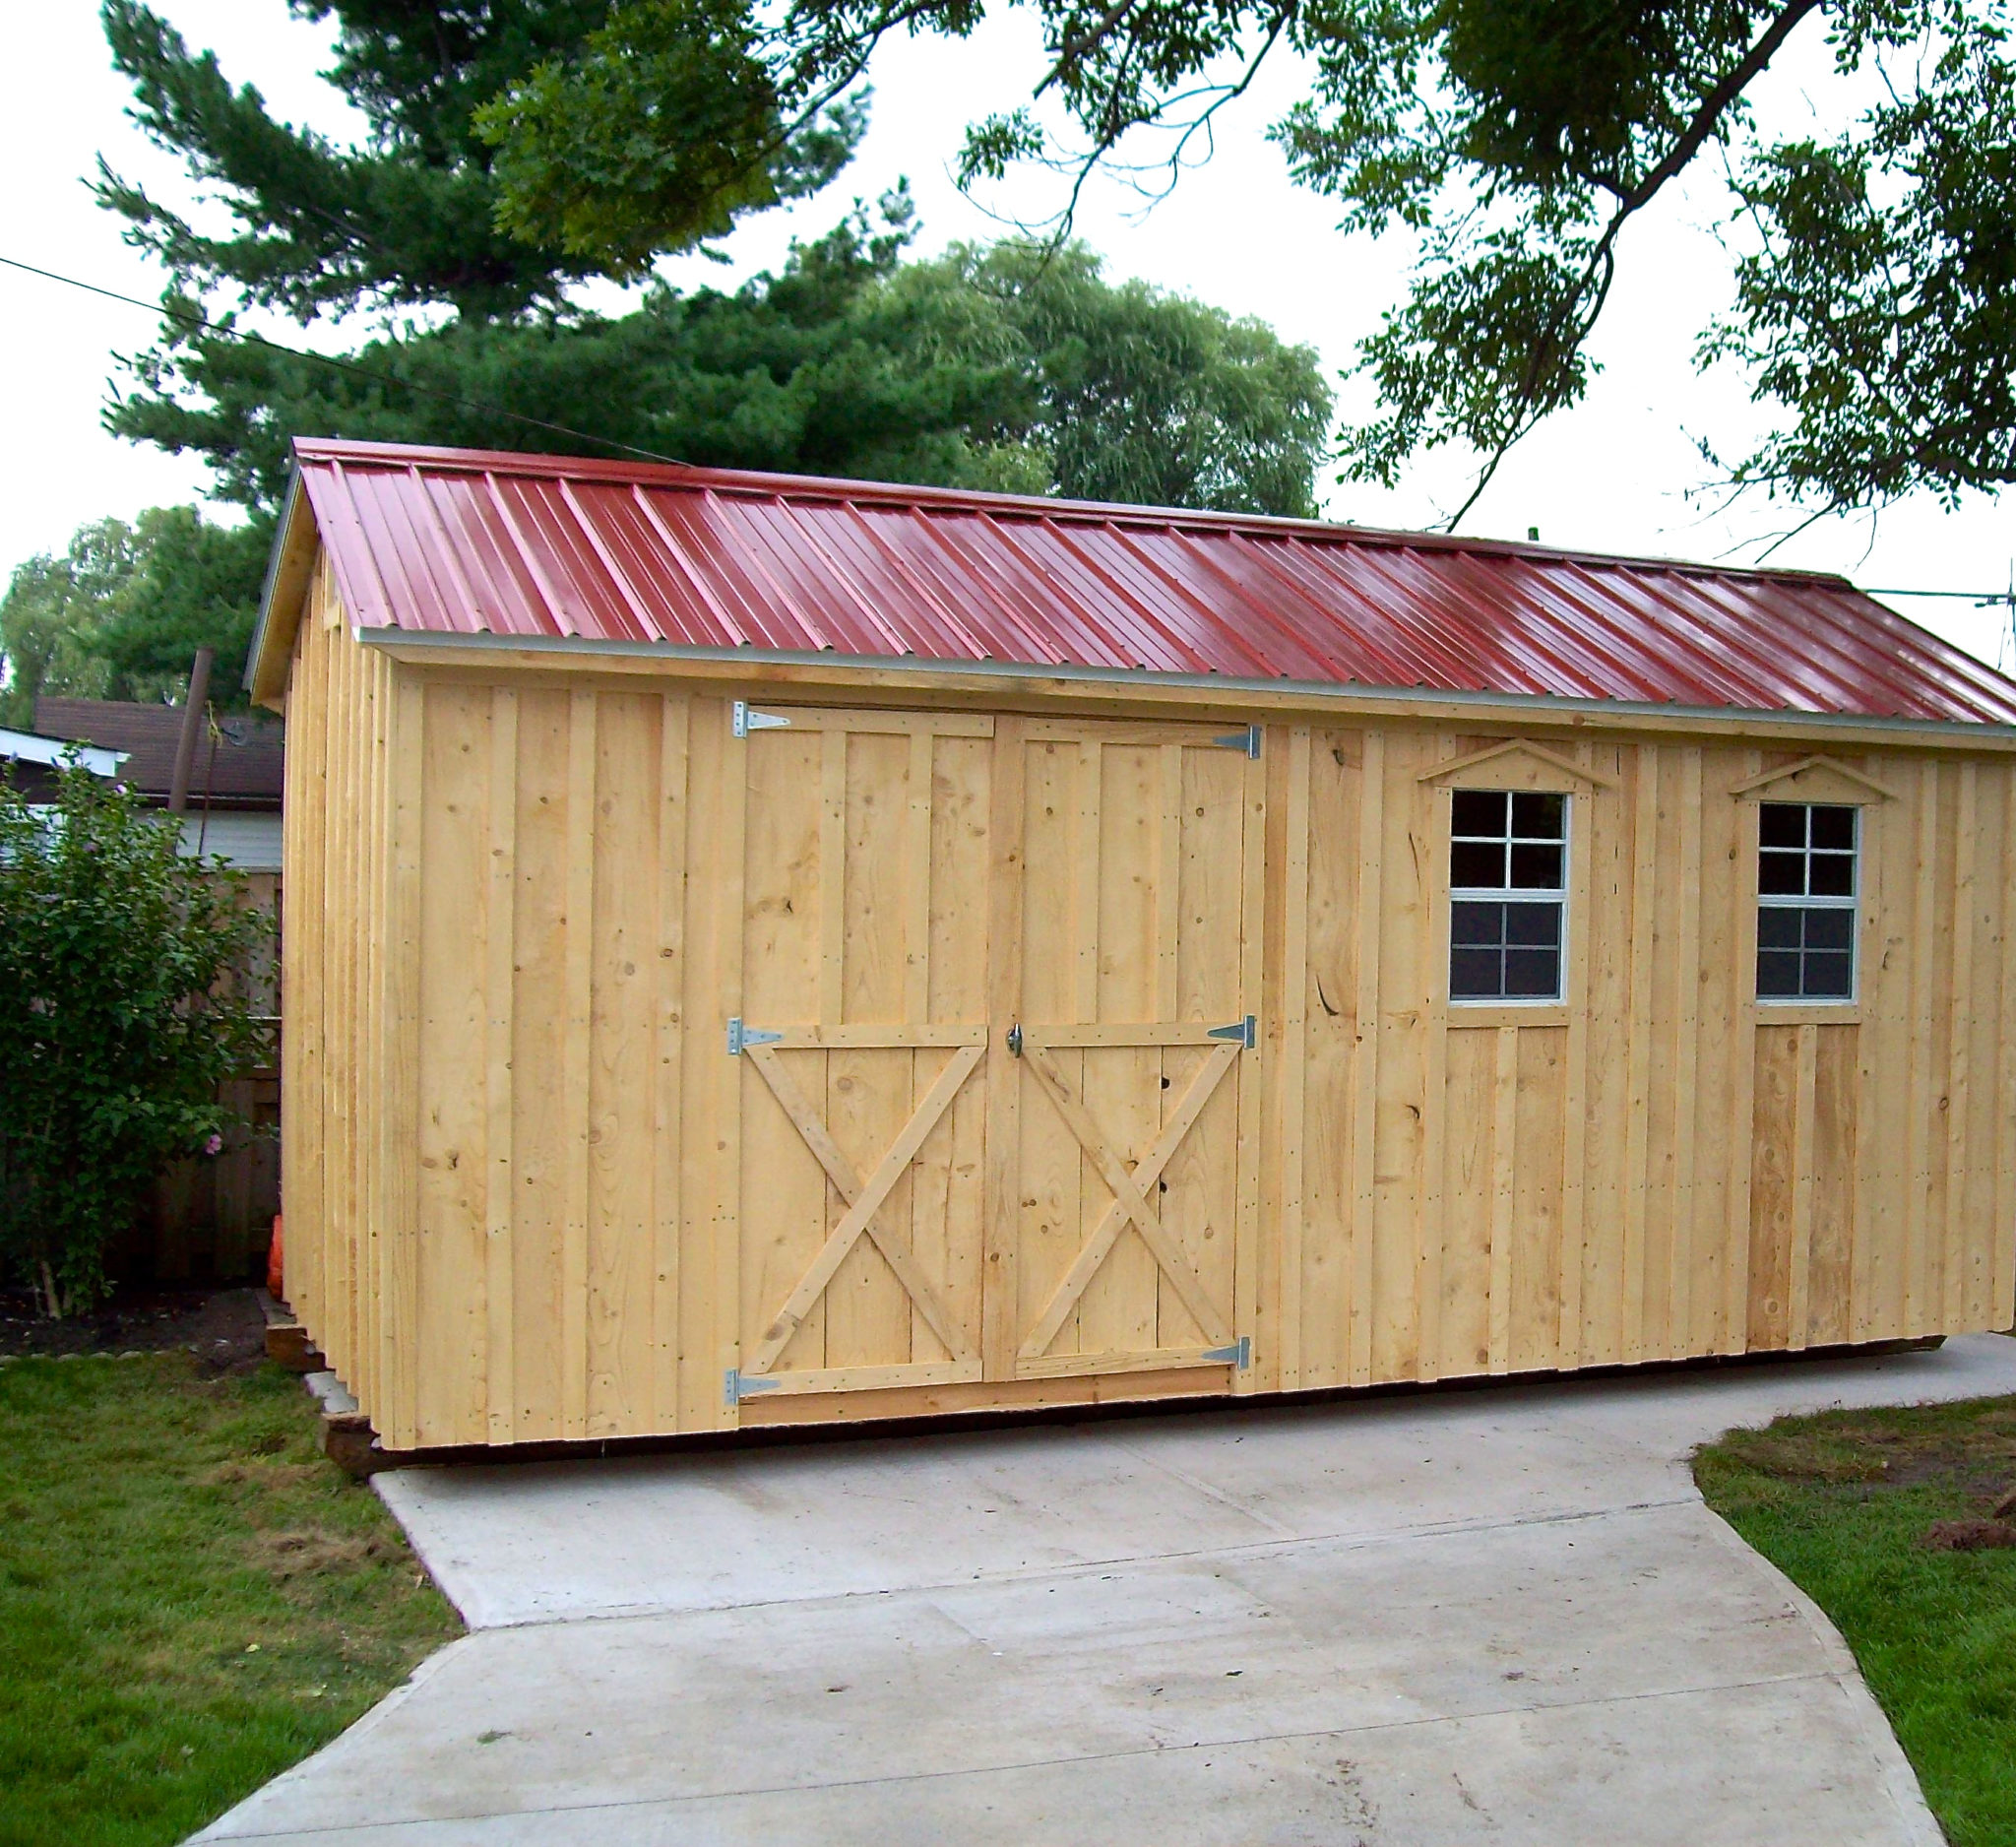 Amish Shed With Red Roof & Double Doors